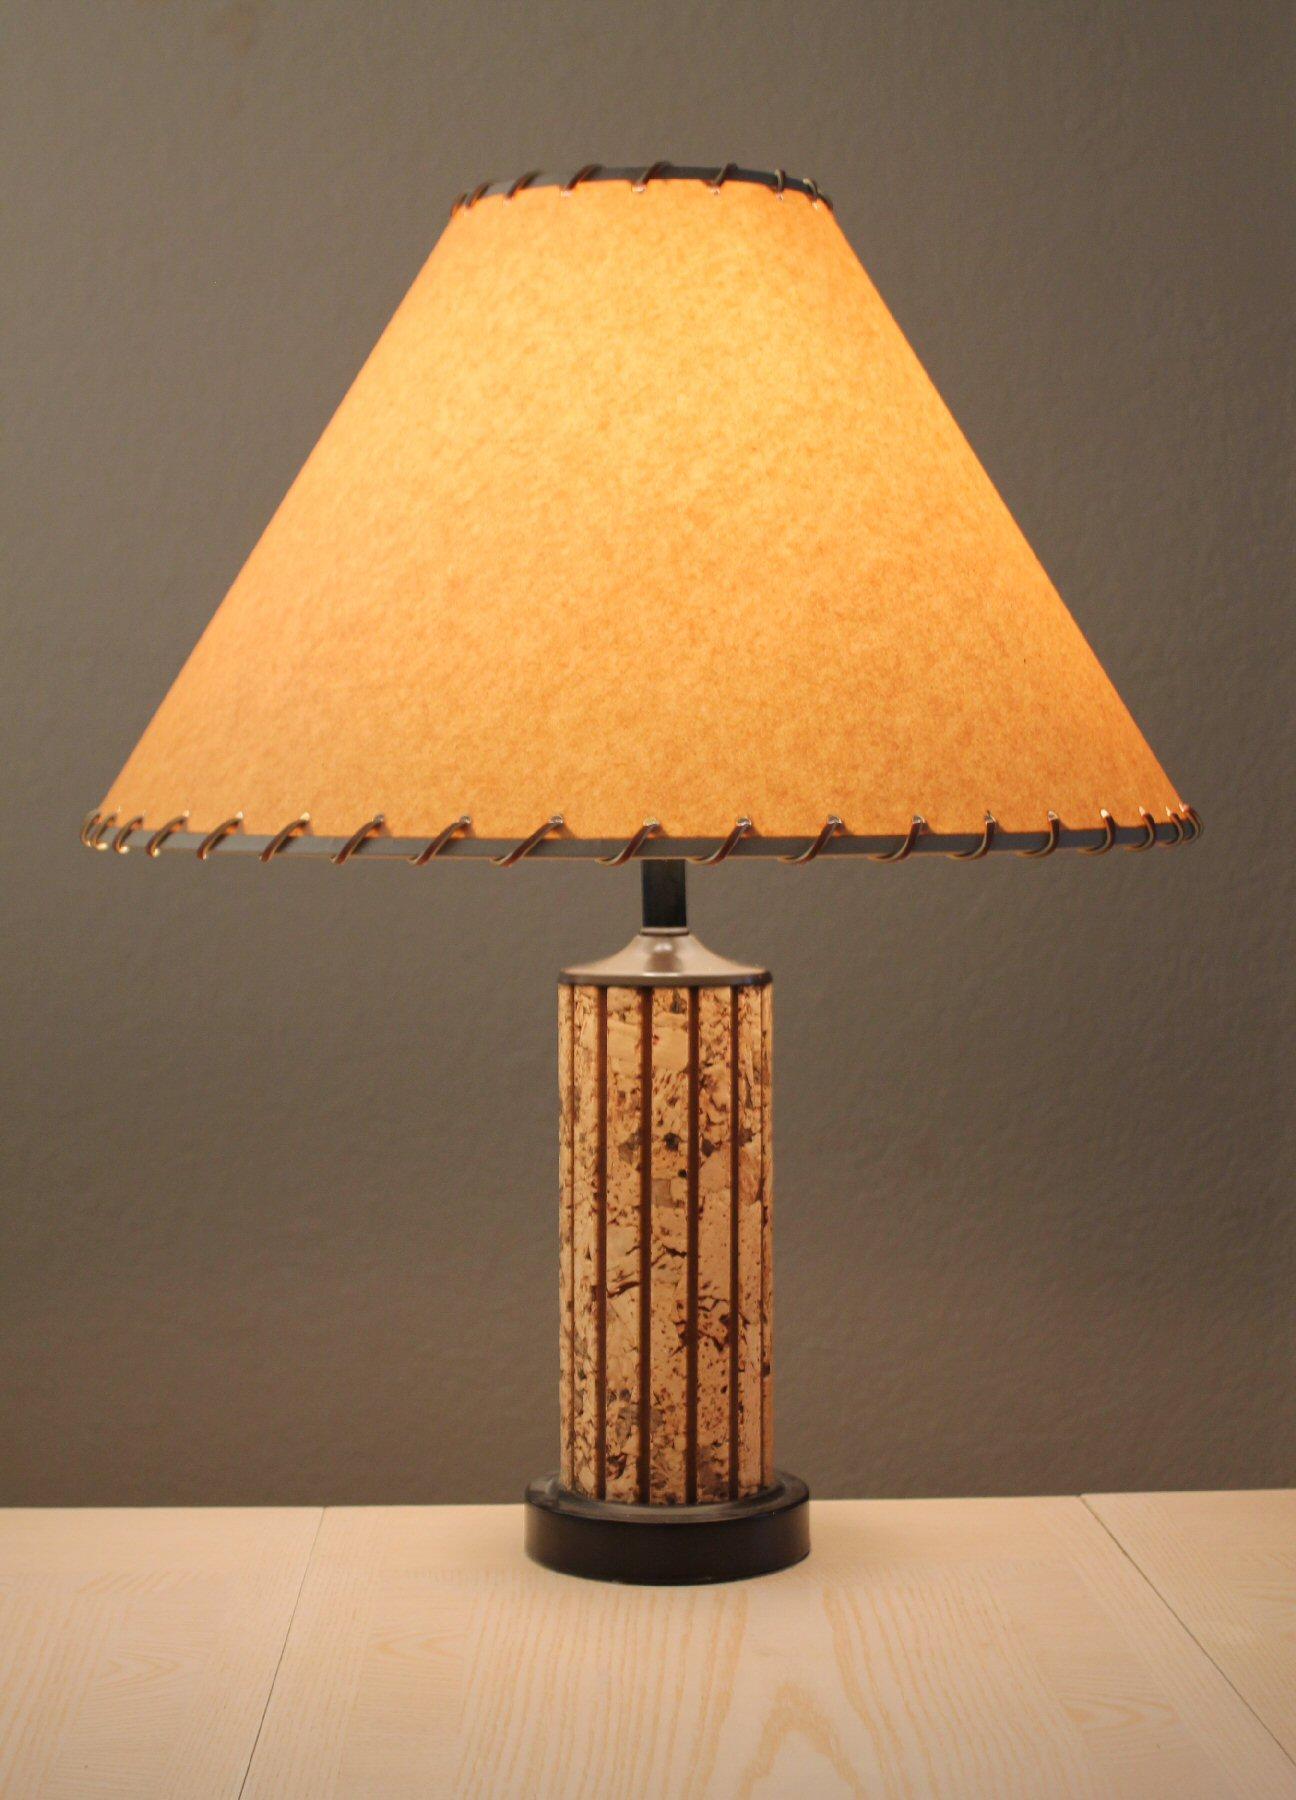 WARM & WELCOMING!


MID CENTURY
DECORATIVE CORK 
TABLE LAMP
SHADE WITH LEATHER WHIPSTITCH

 
In the Manner of Raymor

MID CENTURY PANACHE!

Dimensions:  25